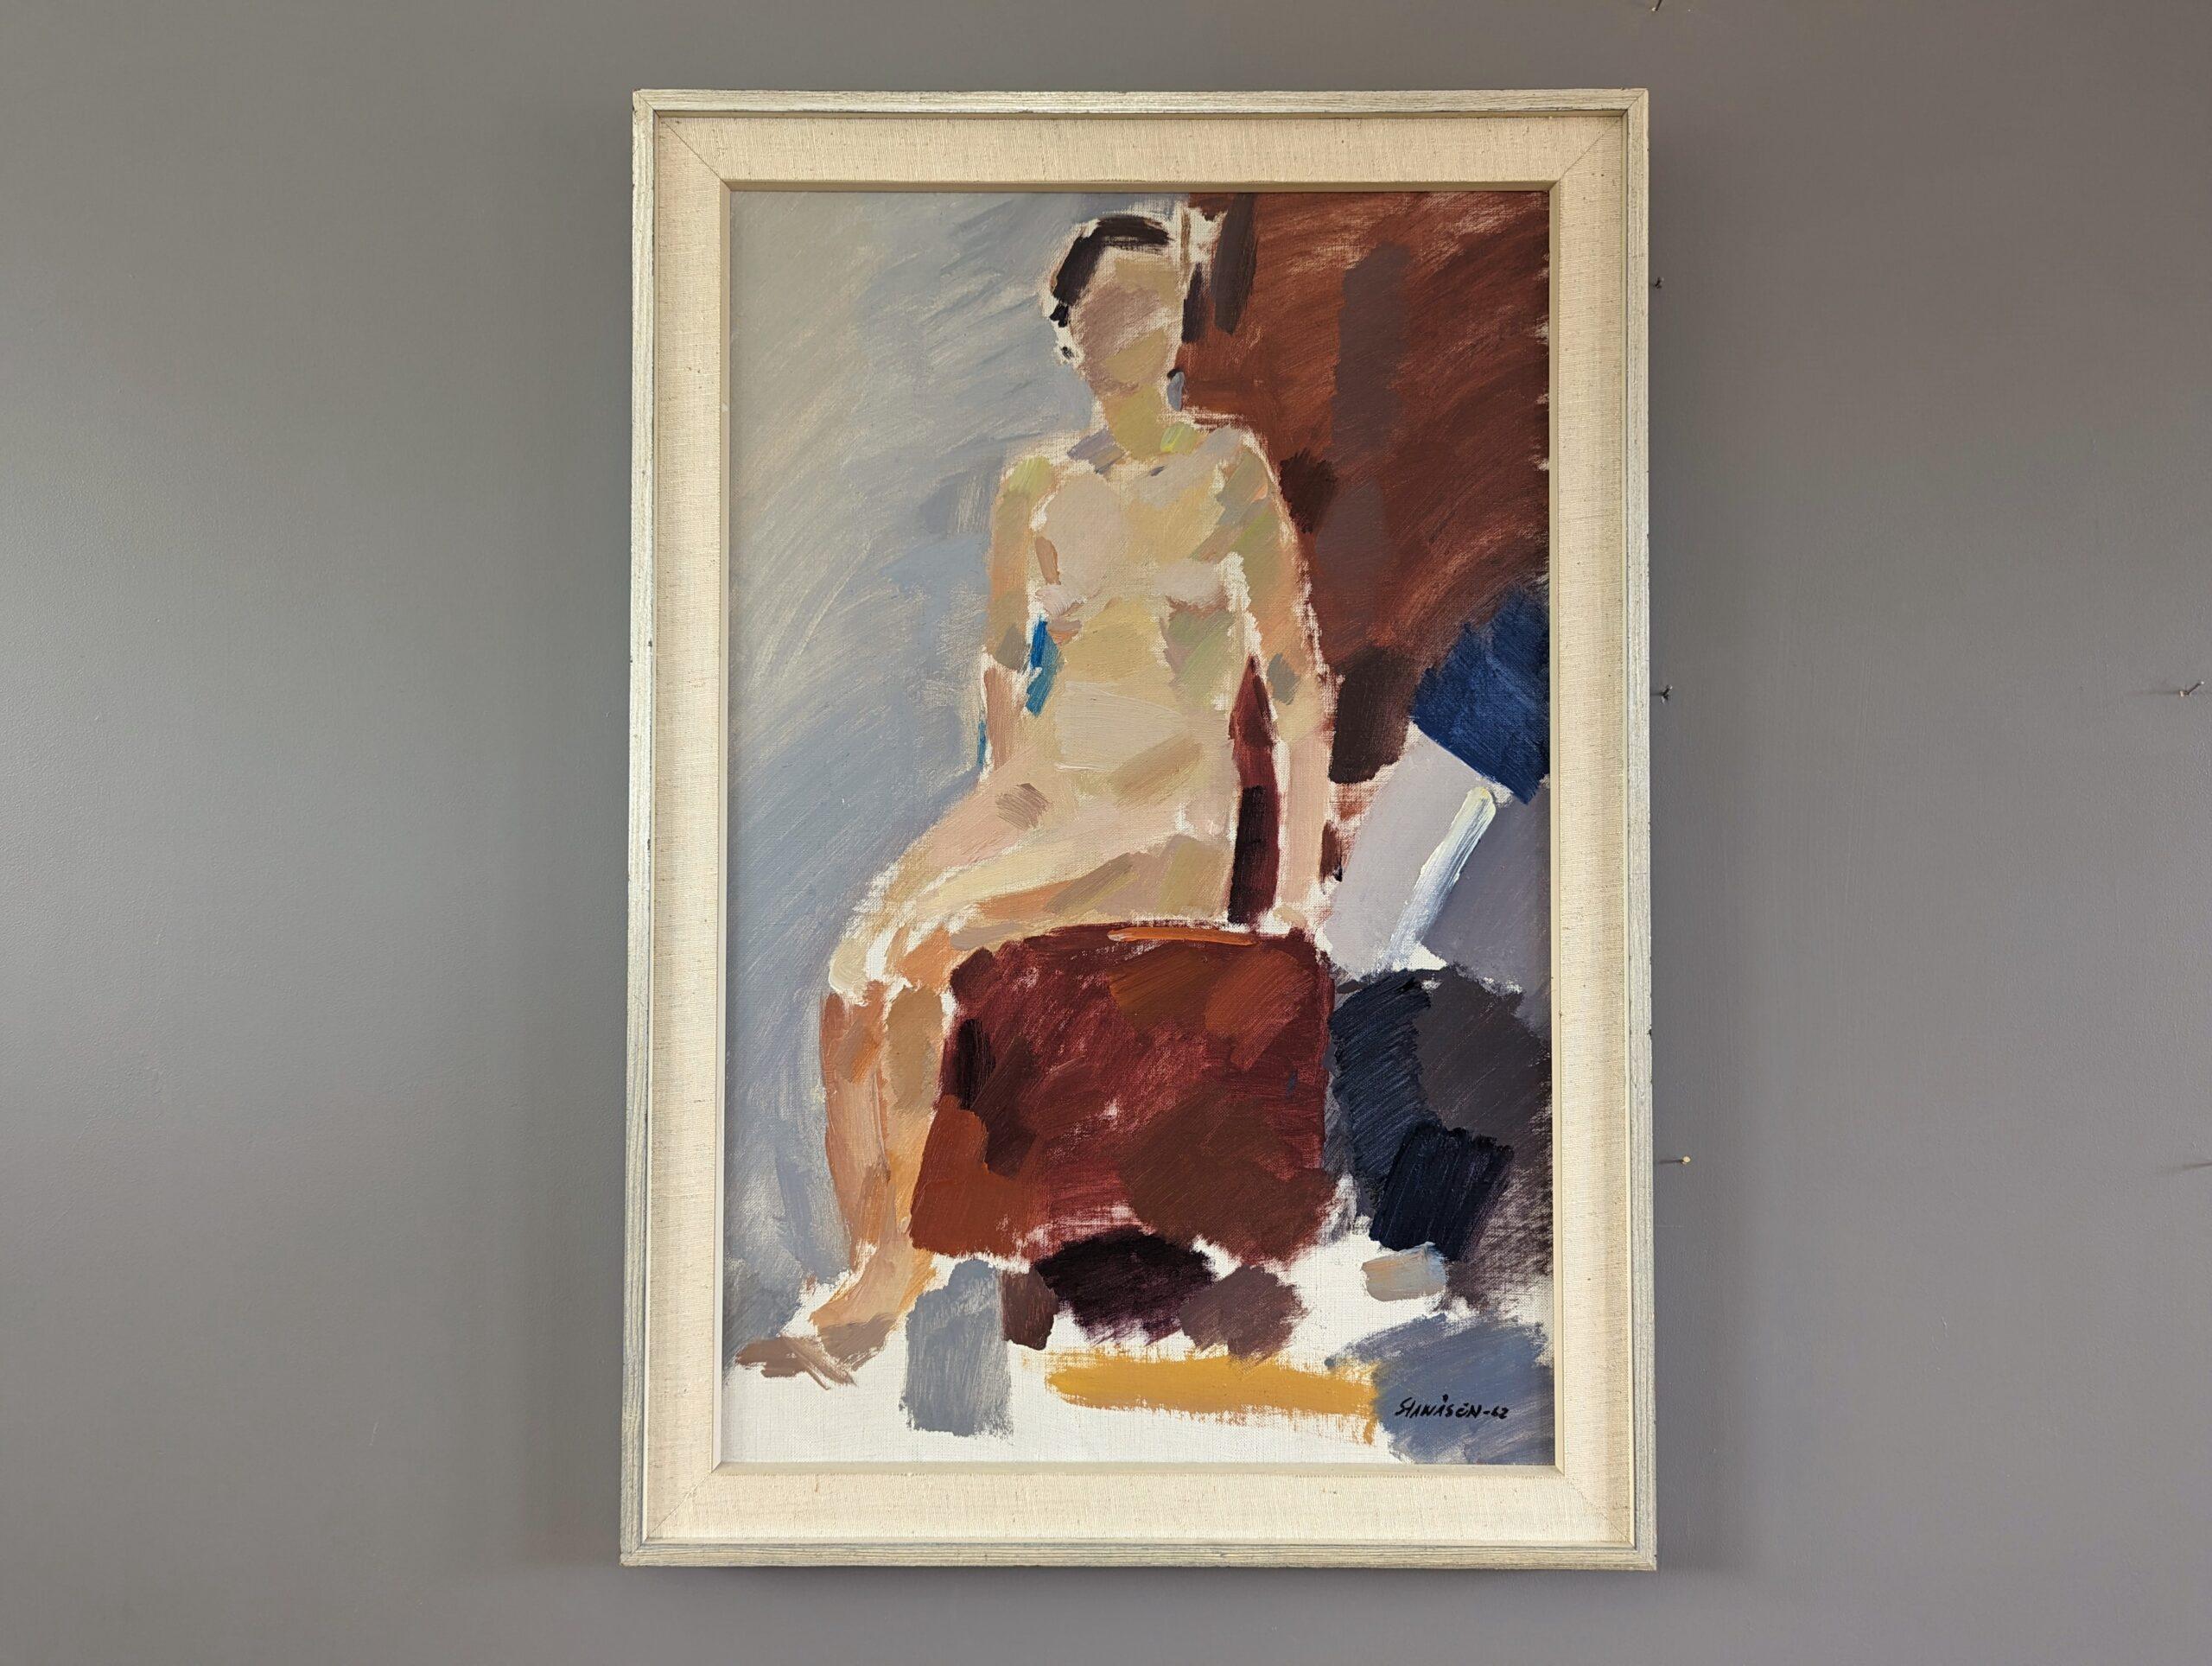 ON THE RED CHAIR
Size: 71.5 x 50 cm (including frame)
Oil on Board

A large and very well-executed mid-century modernist oil composition, painted onto canvas and dated 1962.

In this study of a nude figure, the artist has painted in an expressionist